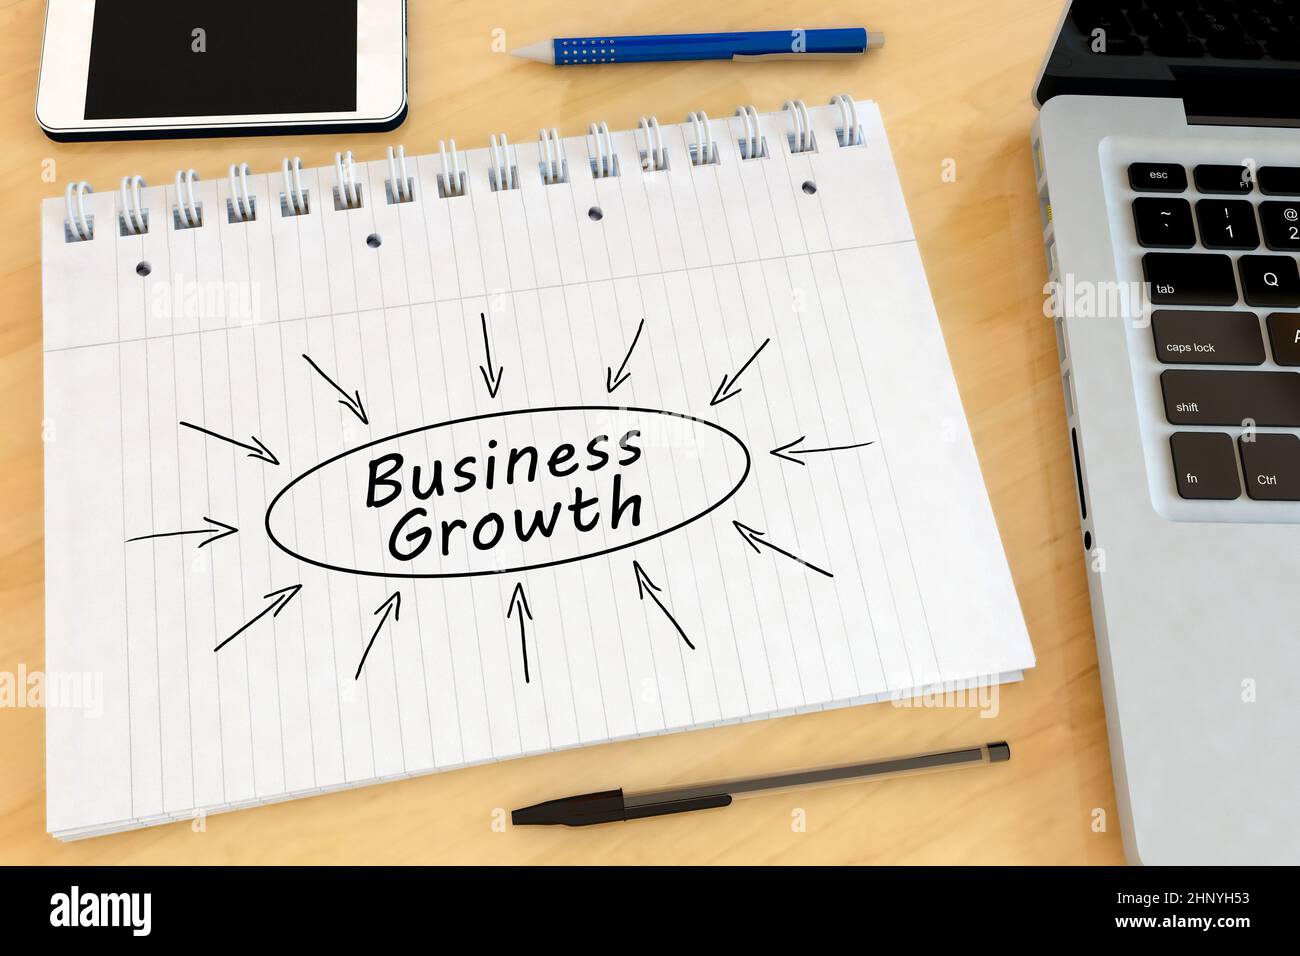 Business Growth - handwritten text in a notebook on a desk - 3d render illustration. Stock Photo